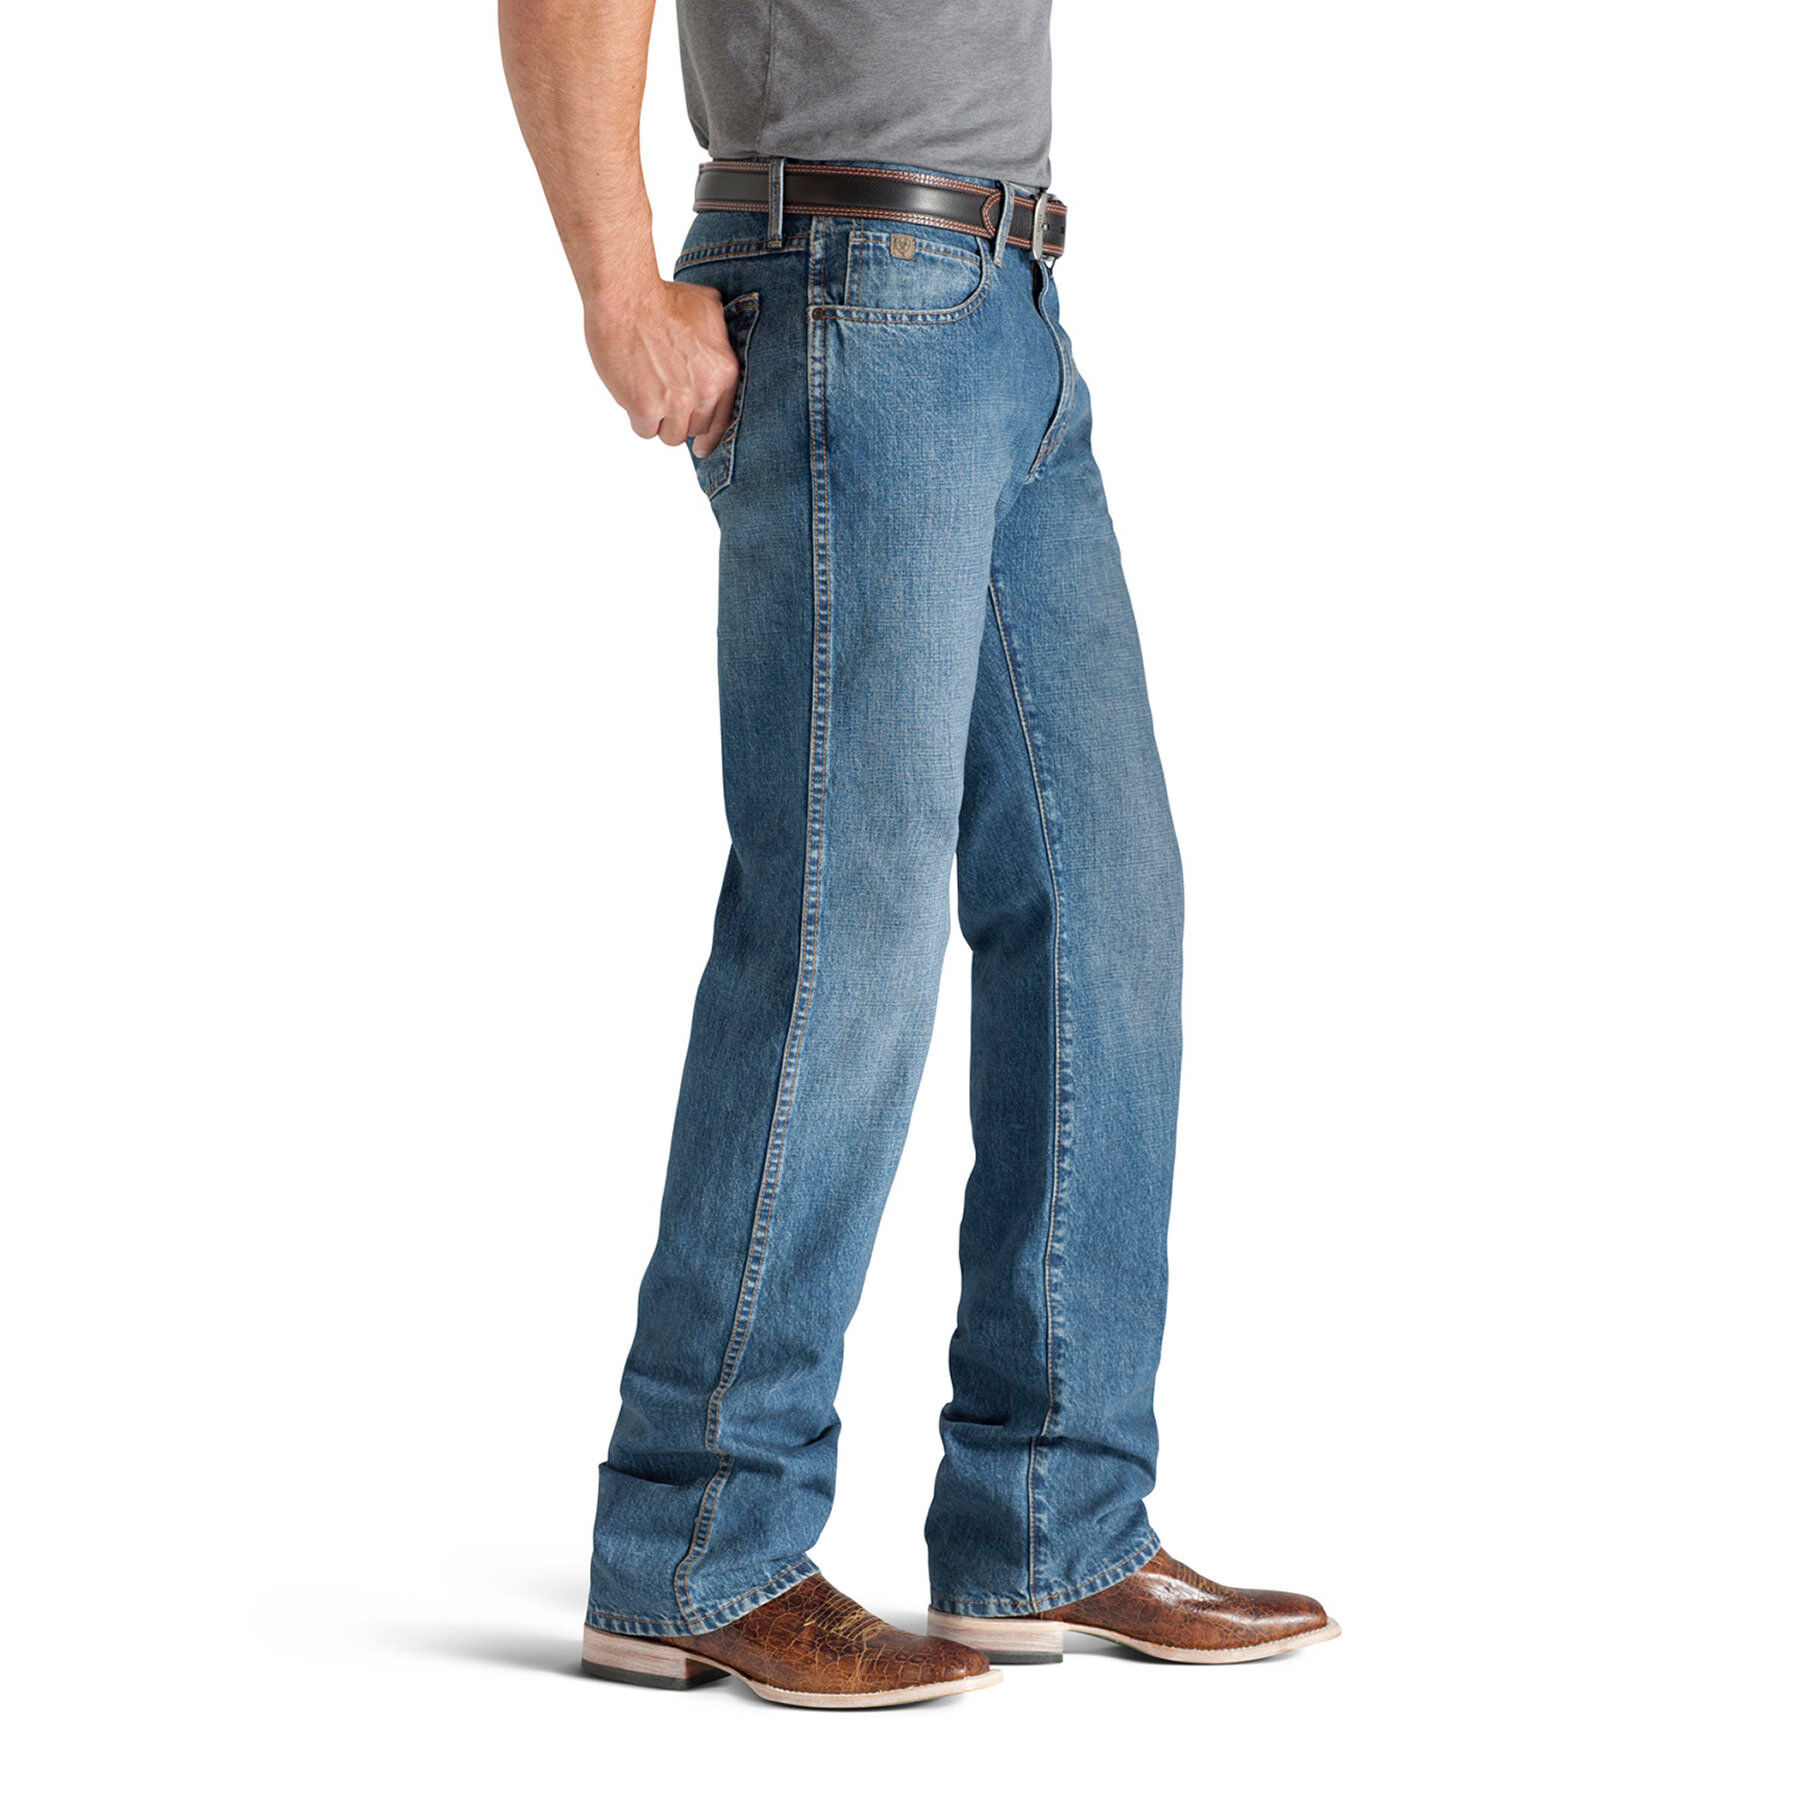 flare jeans for short people